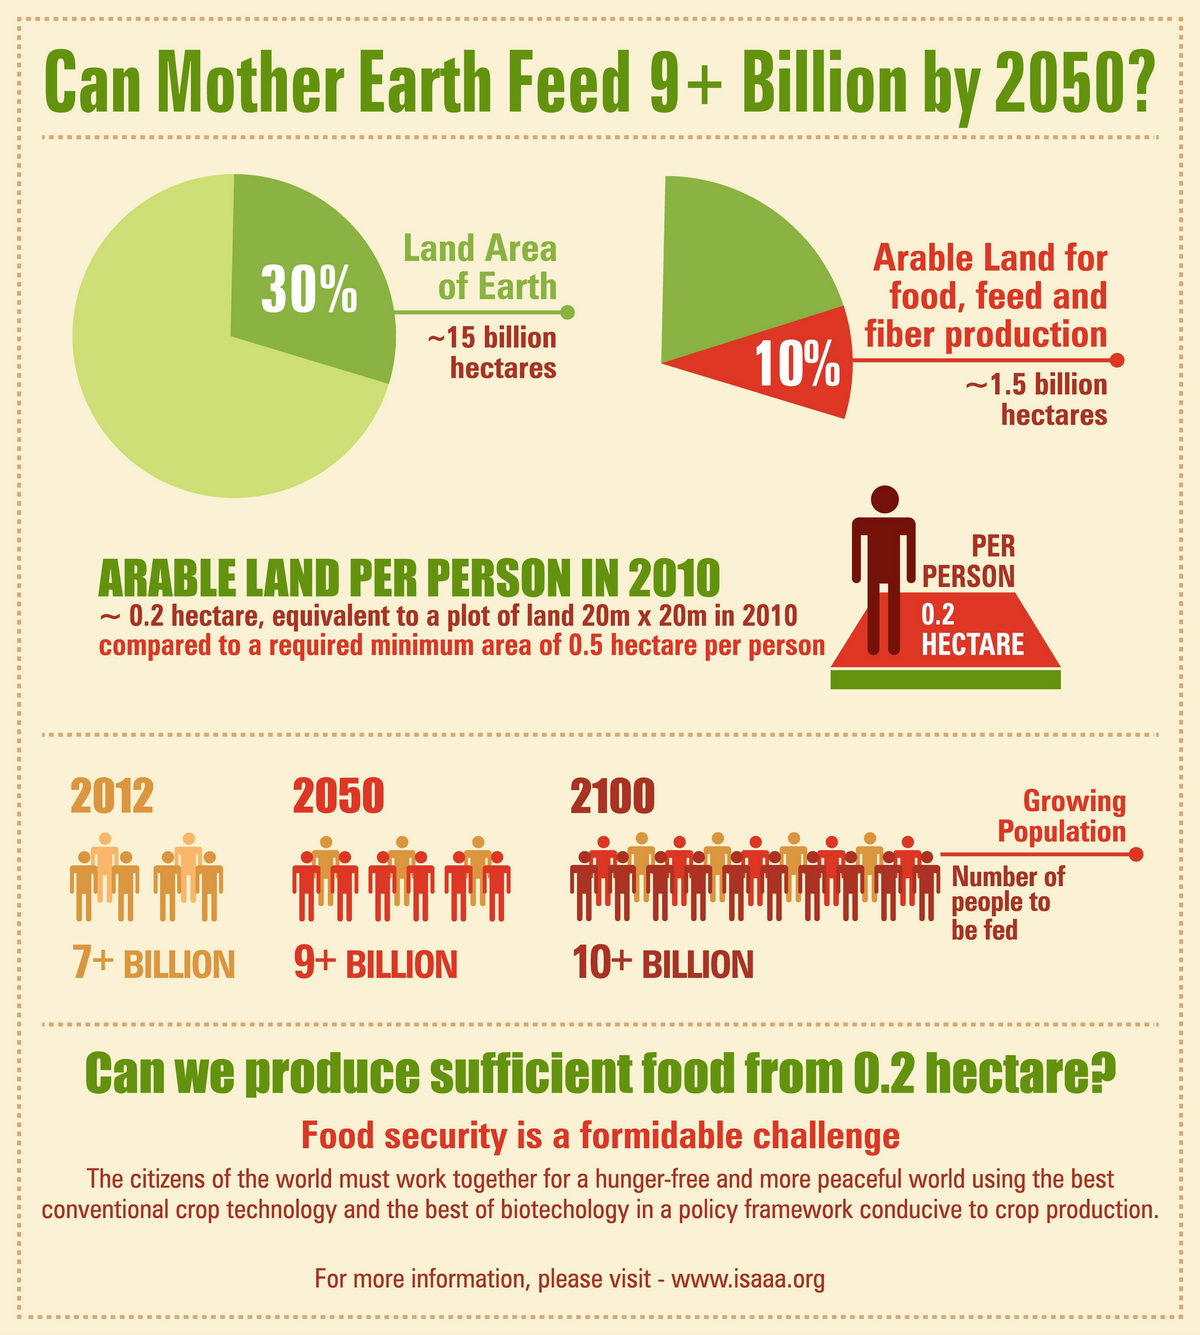 Can Mother Earth Feed 9 Billion by 2050?